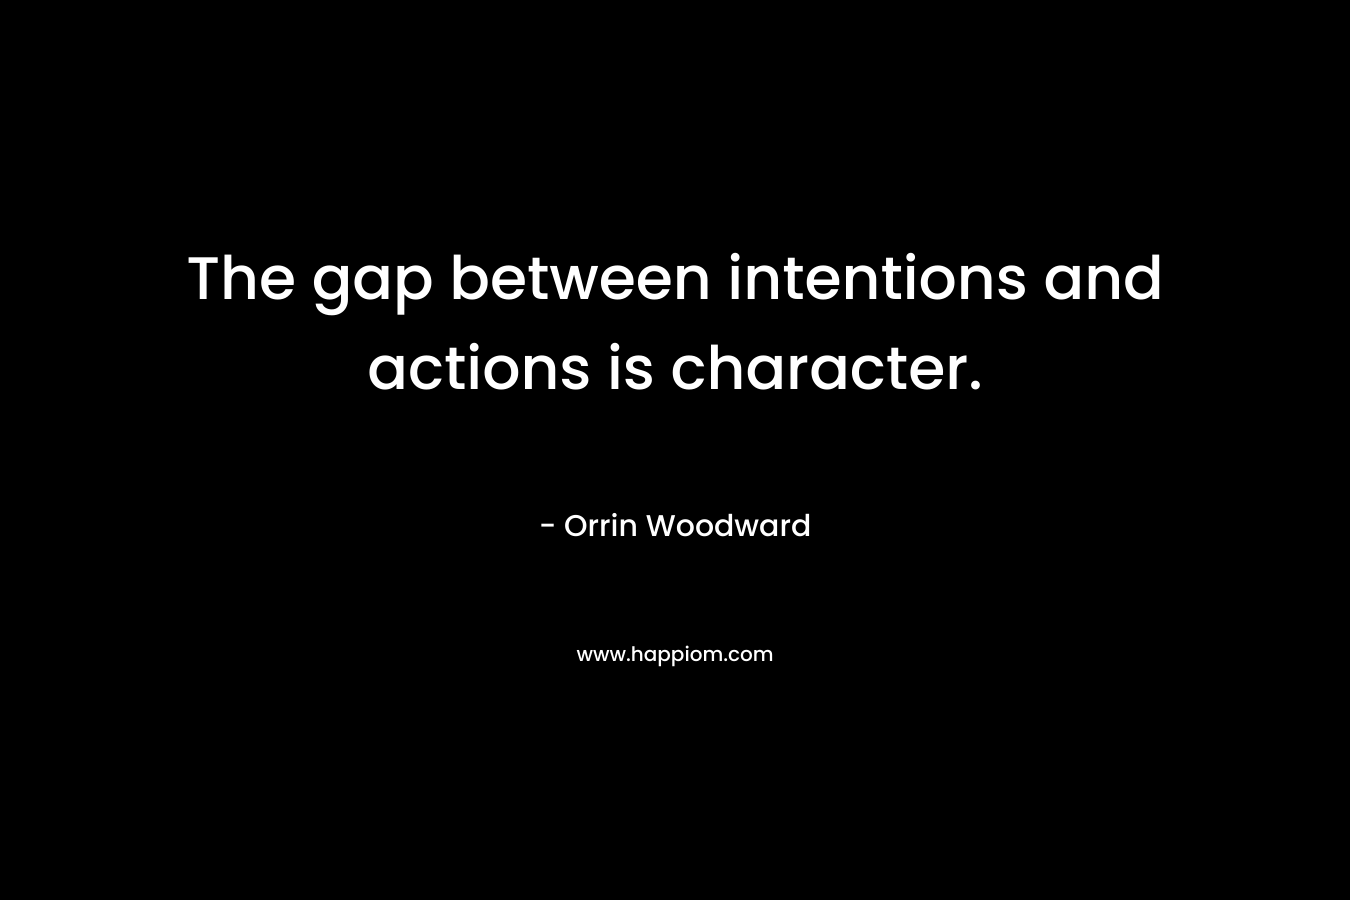 The gap between intentions and actions is character. – Orrin Woodward